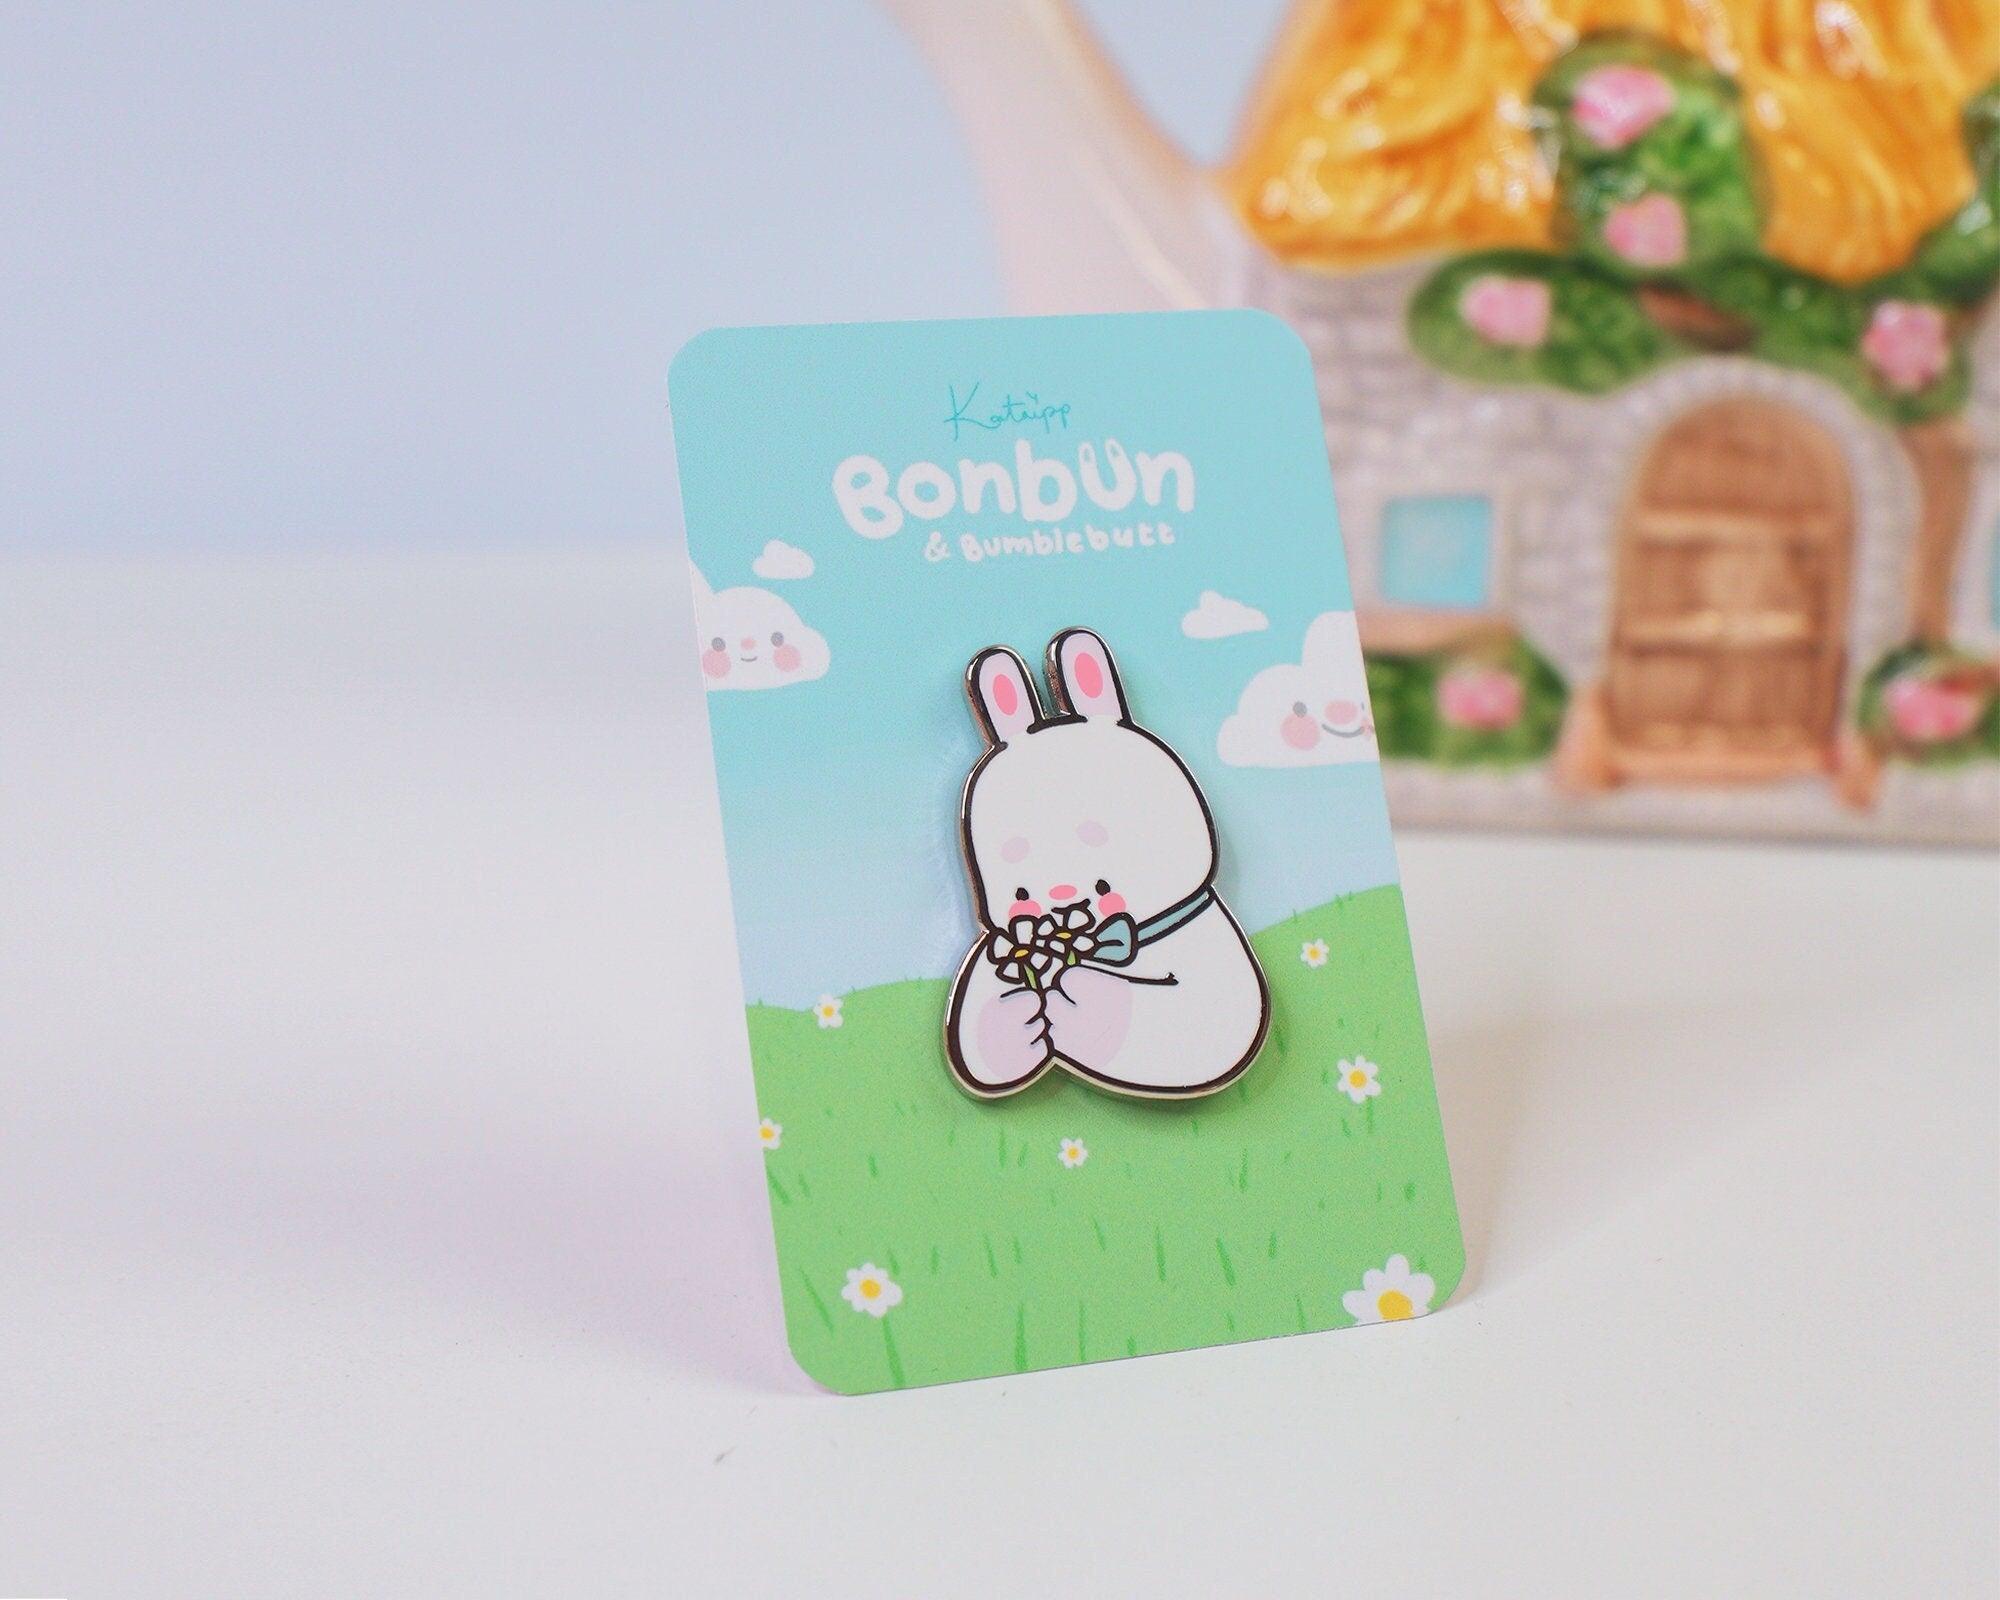 Bonbun The Little Bunny Enamel Pin - Cute bunny pin accessory for clothing or bags.